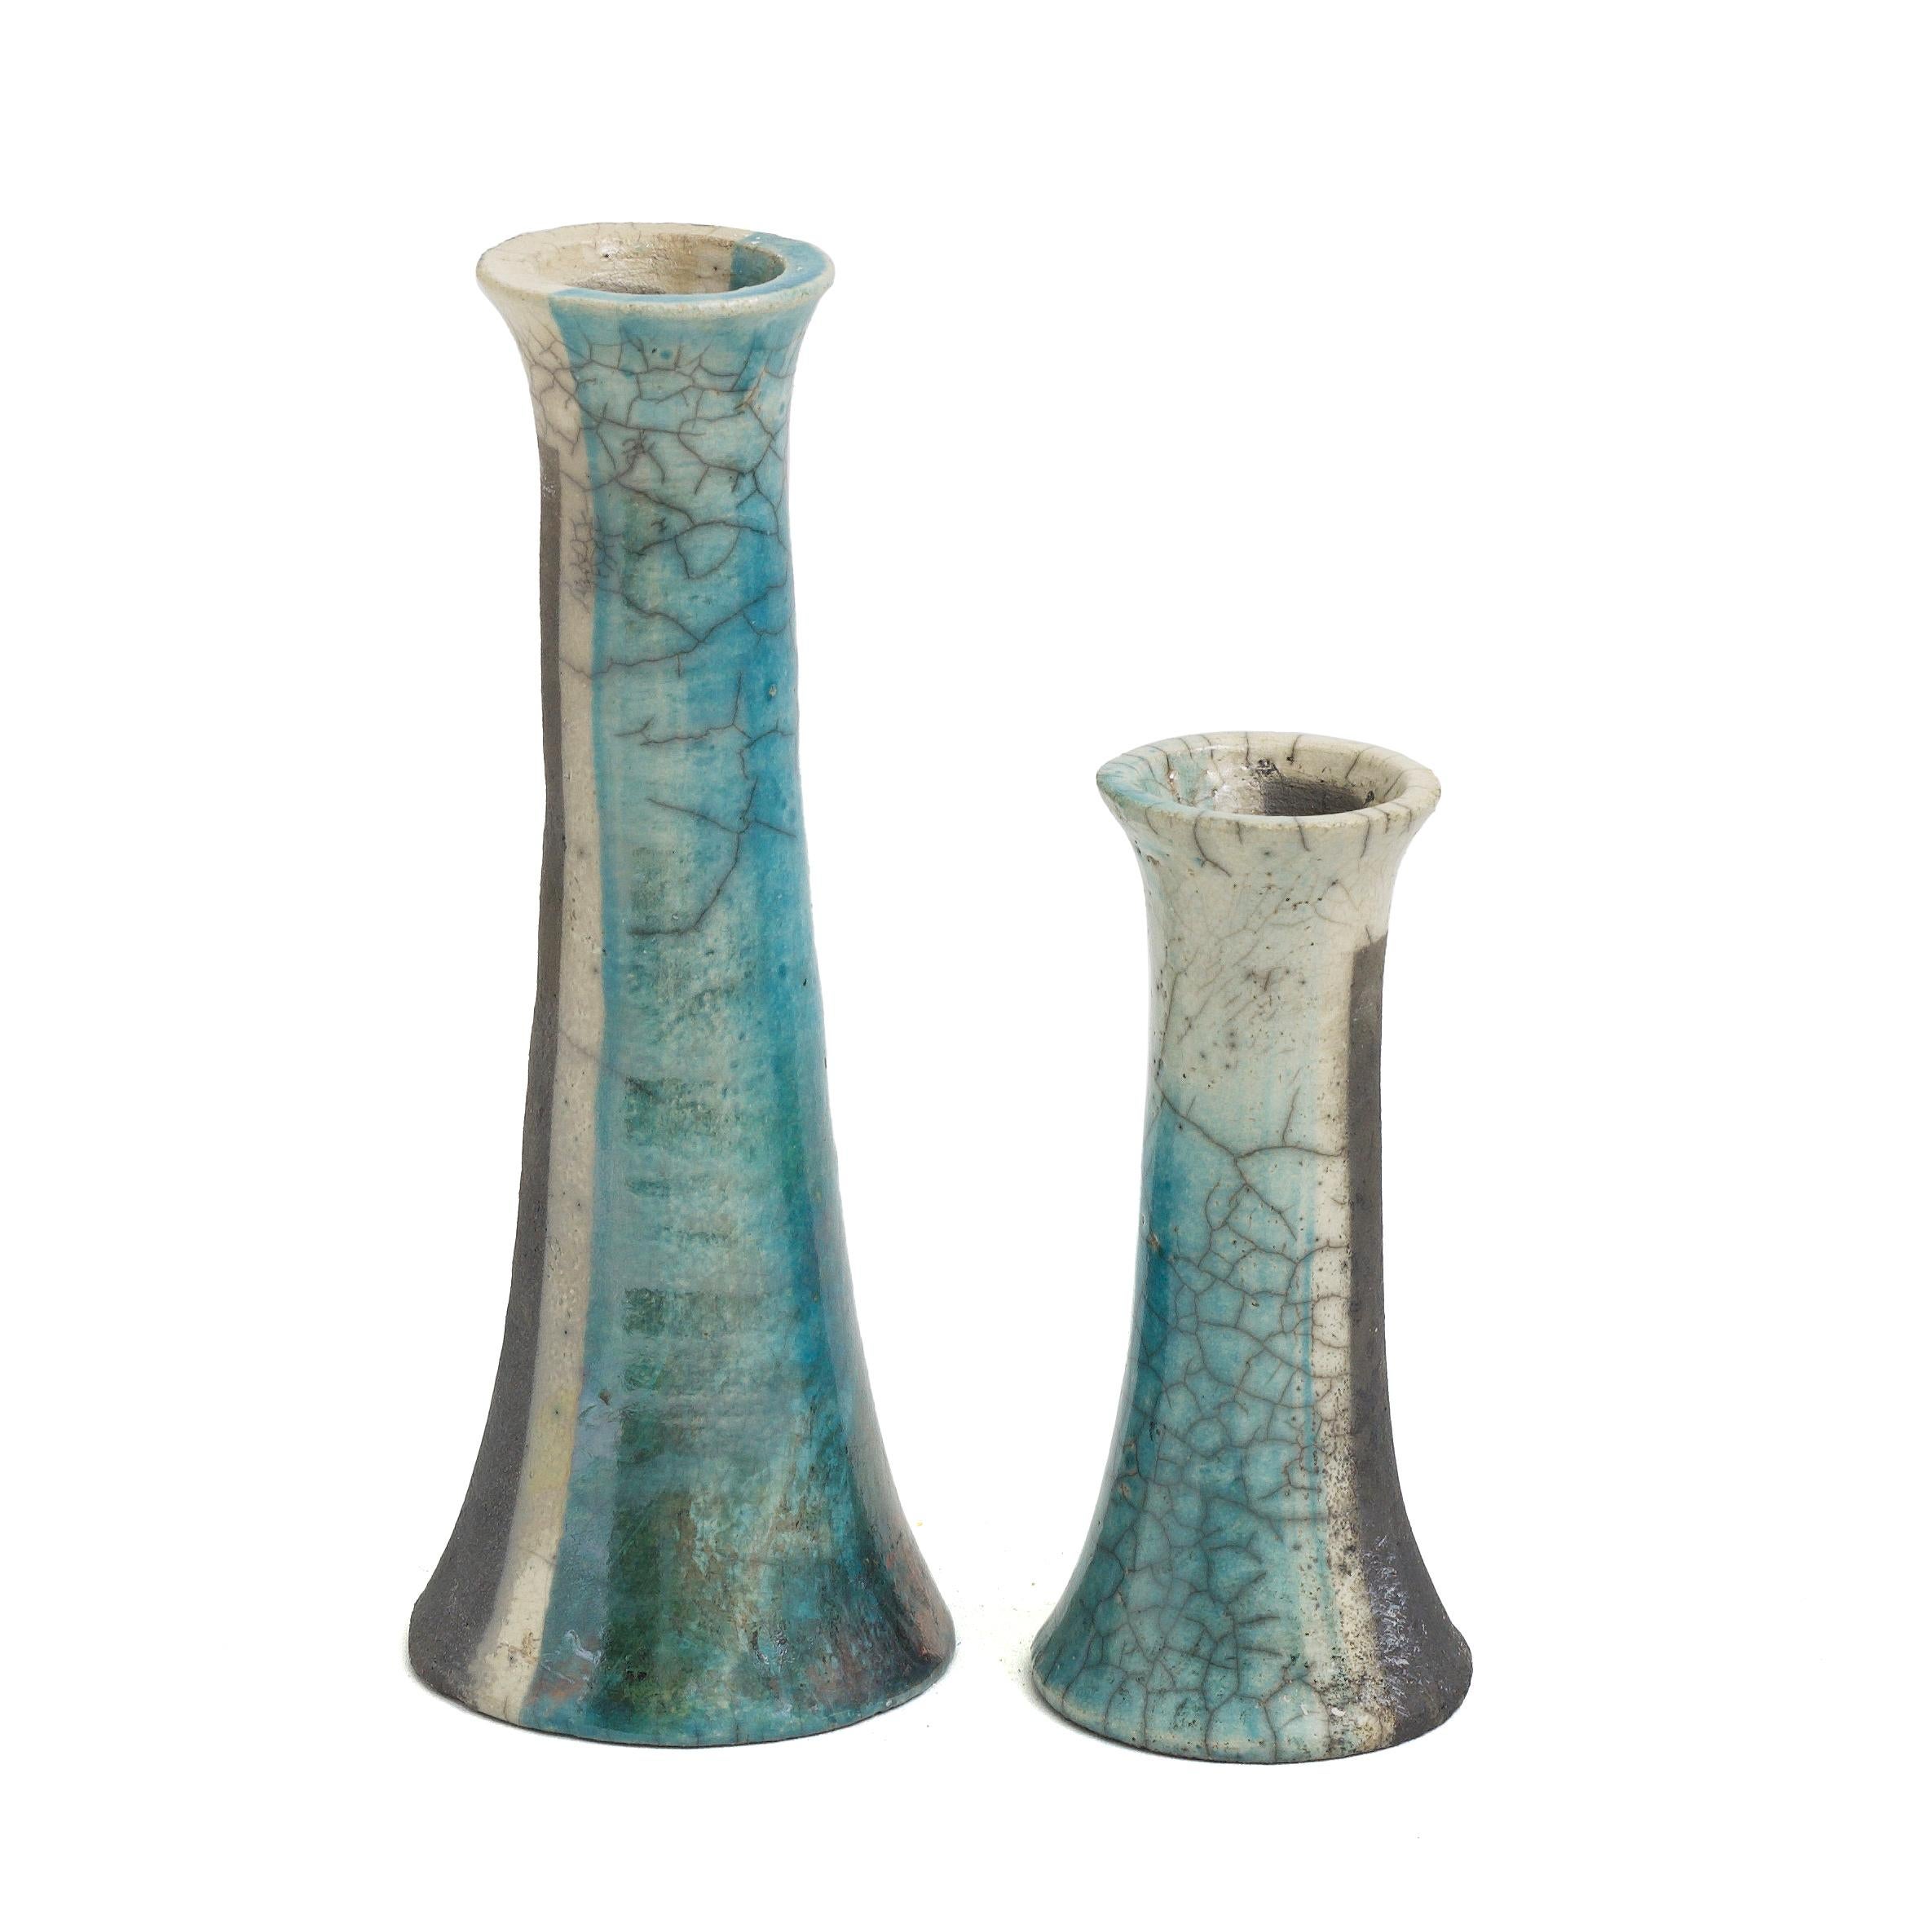 Stelo Wake Candle Holders

Turquoise and crackle' effect are the main colors of these candle holders but the black and burnt effect is present on both the outside of the pieces and the inside of the mouth holding the candles. A symbol of